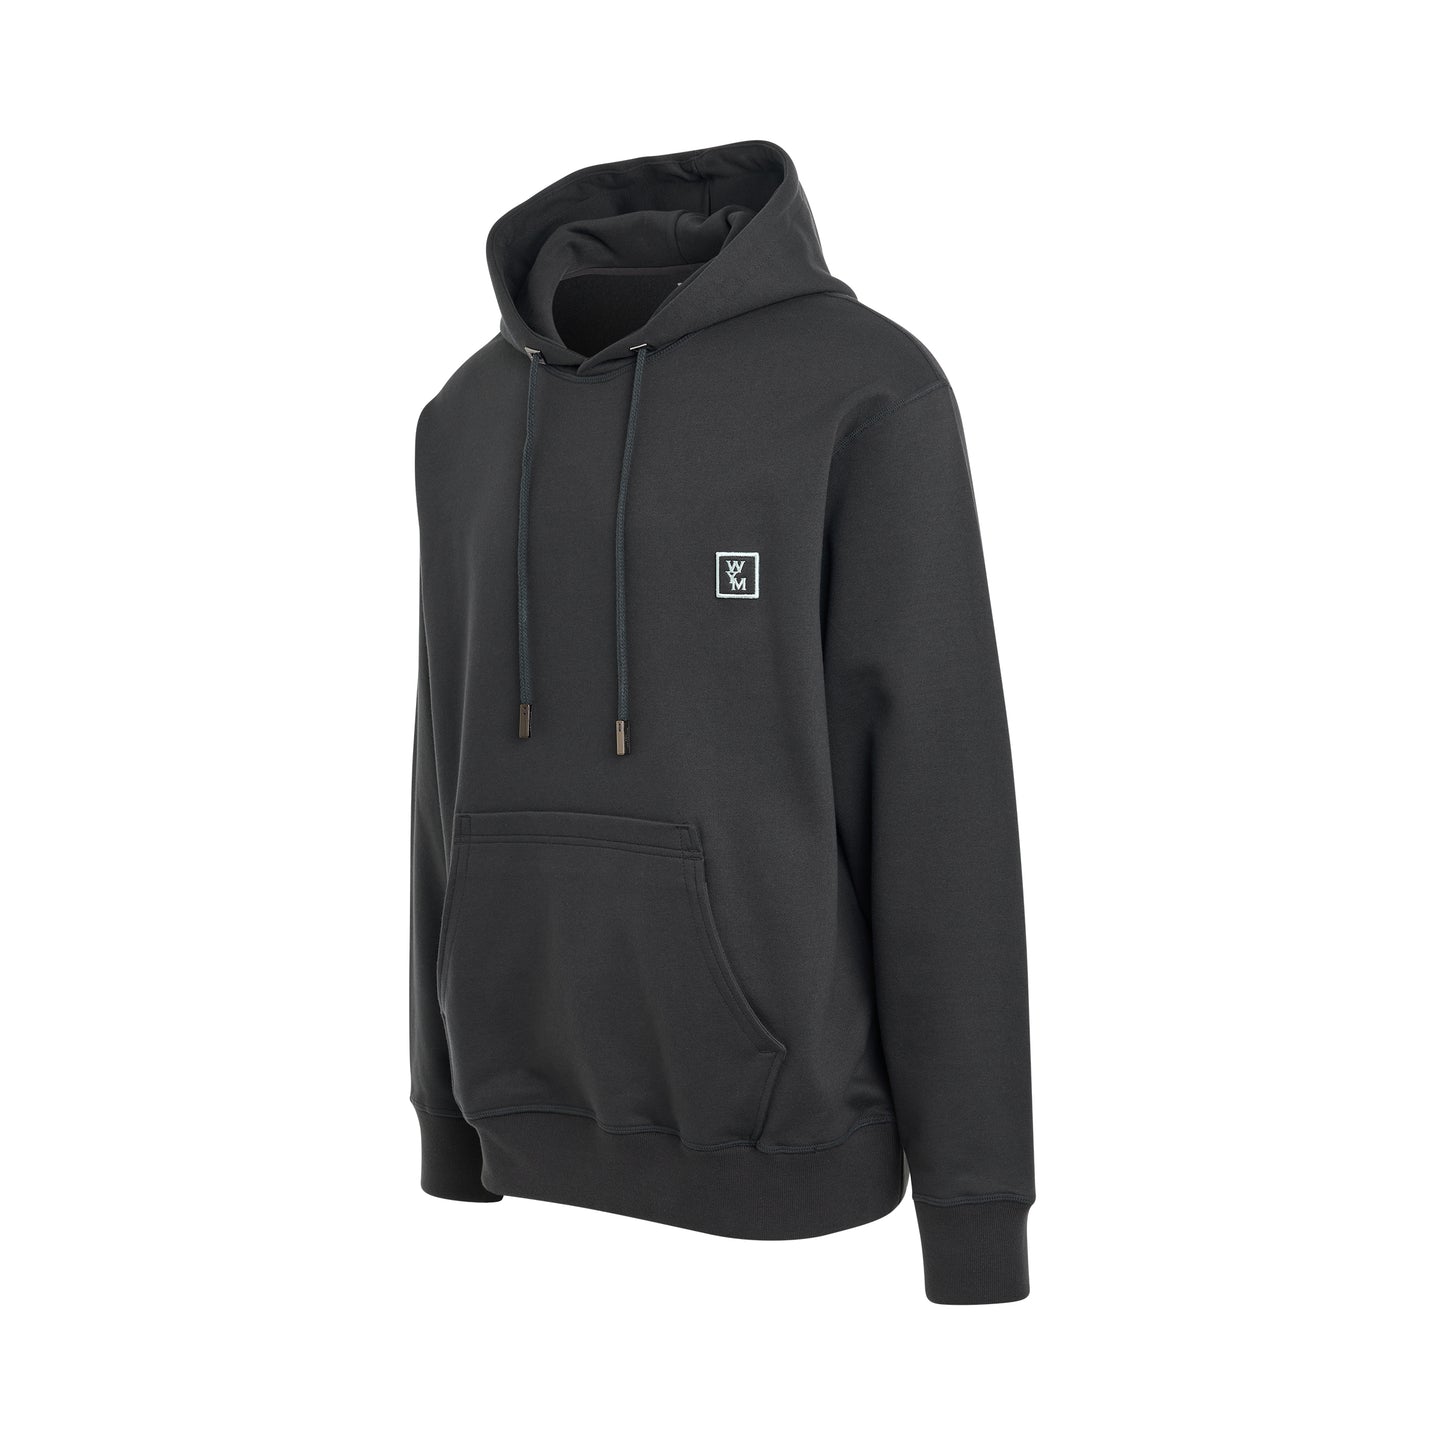 WYM Logo Embroidered Hoodie in Grey